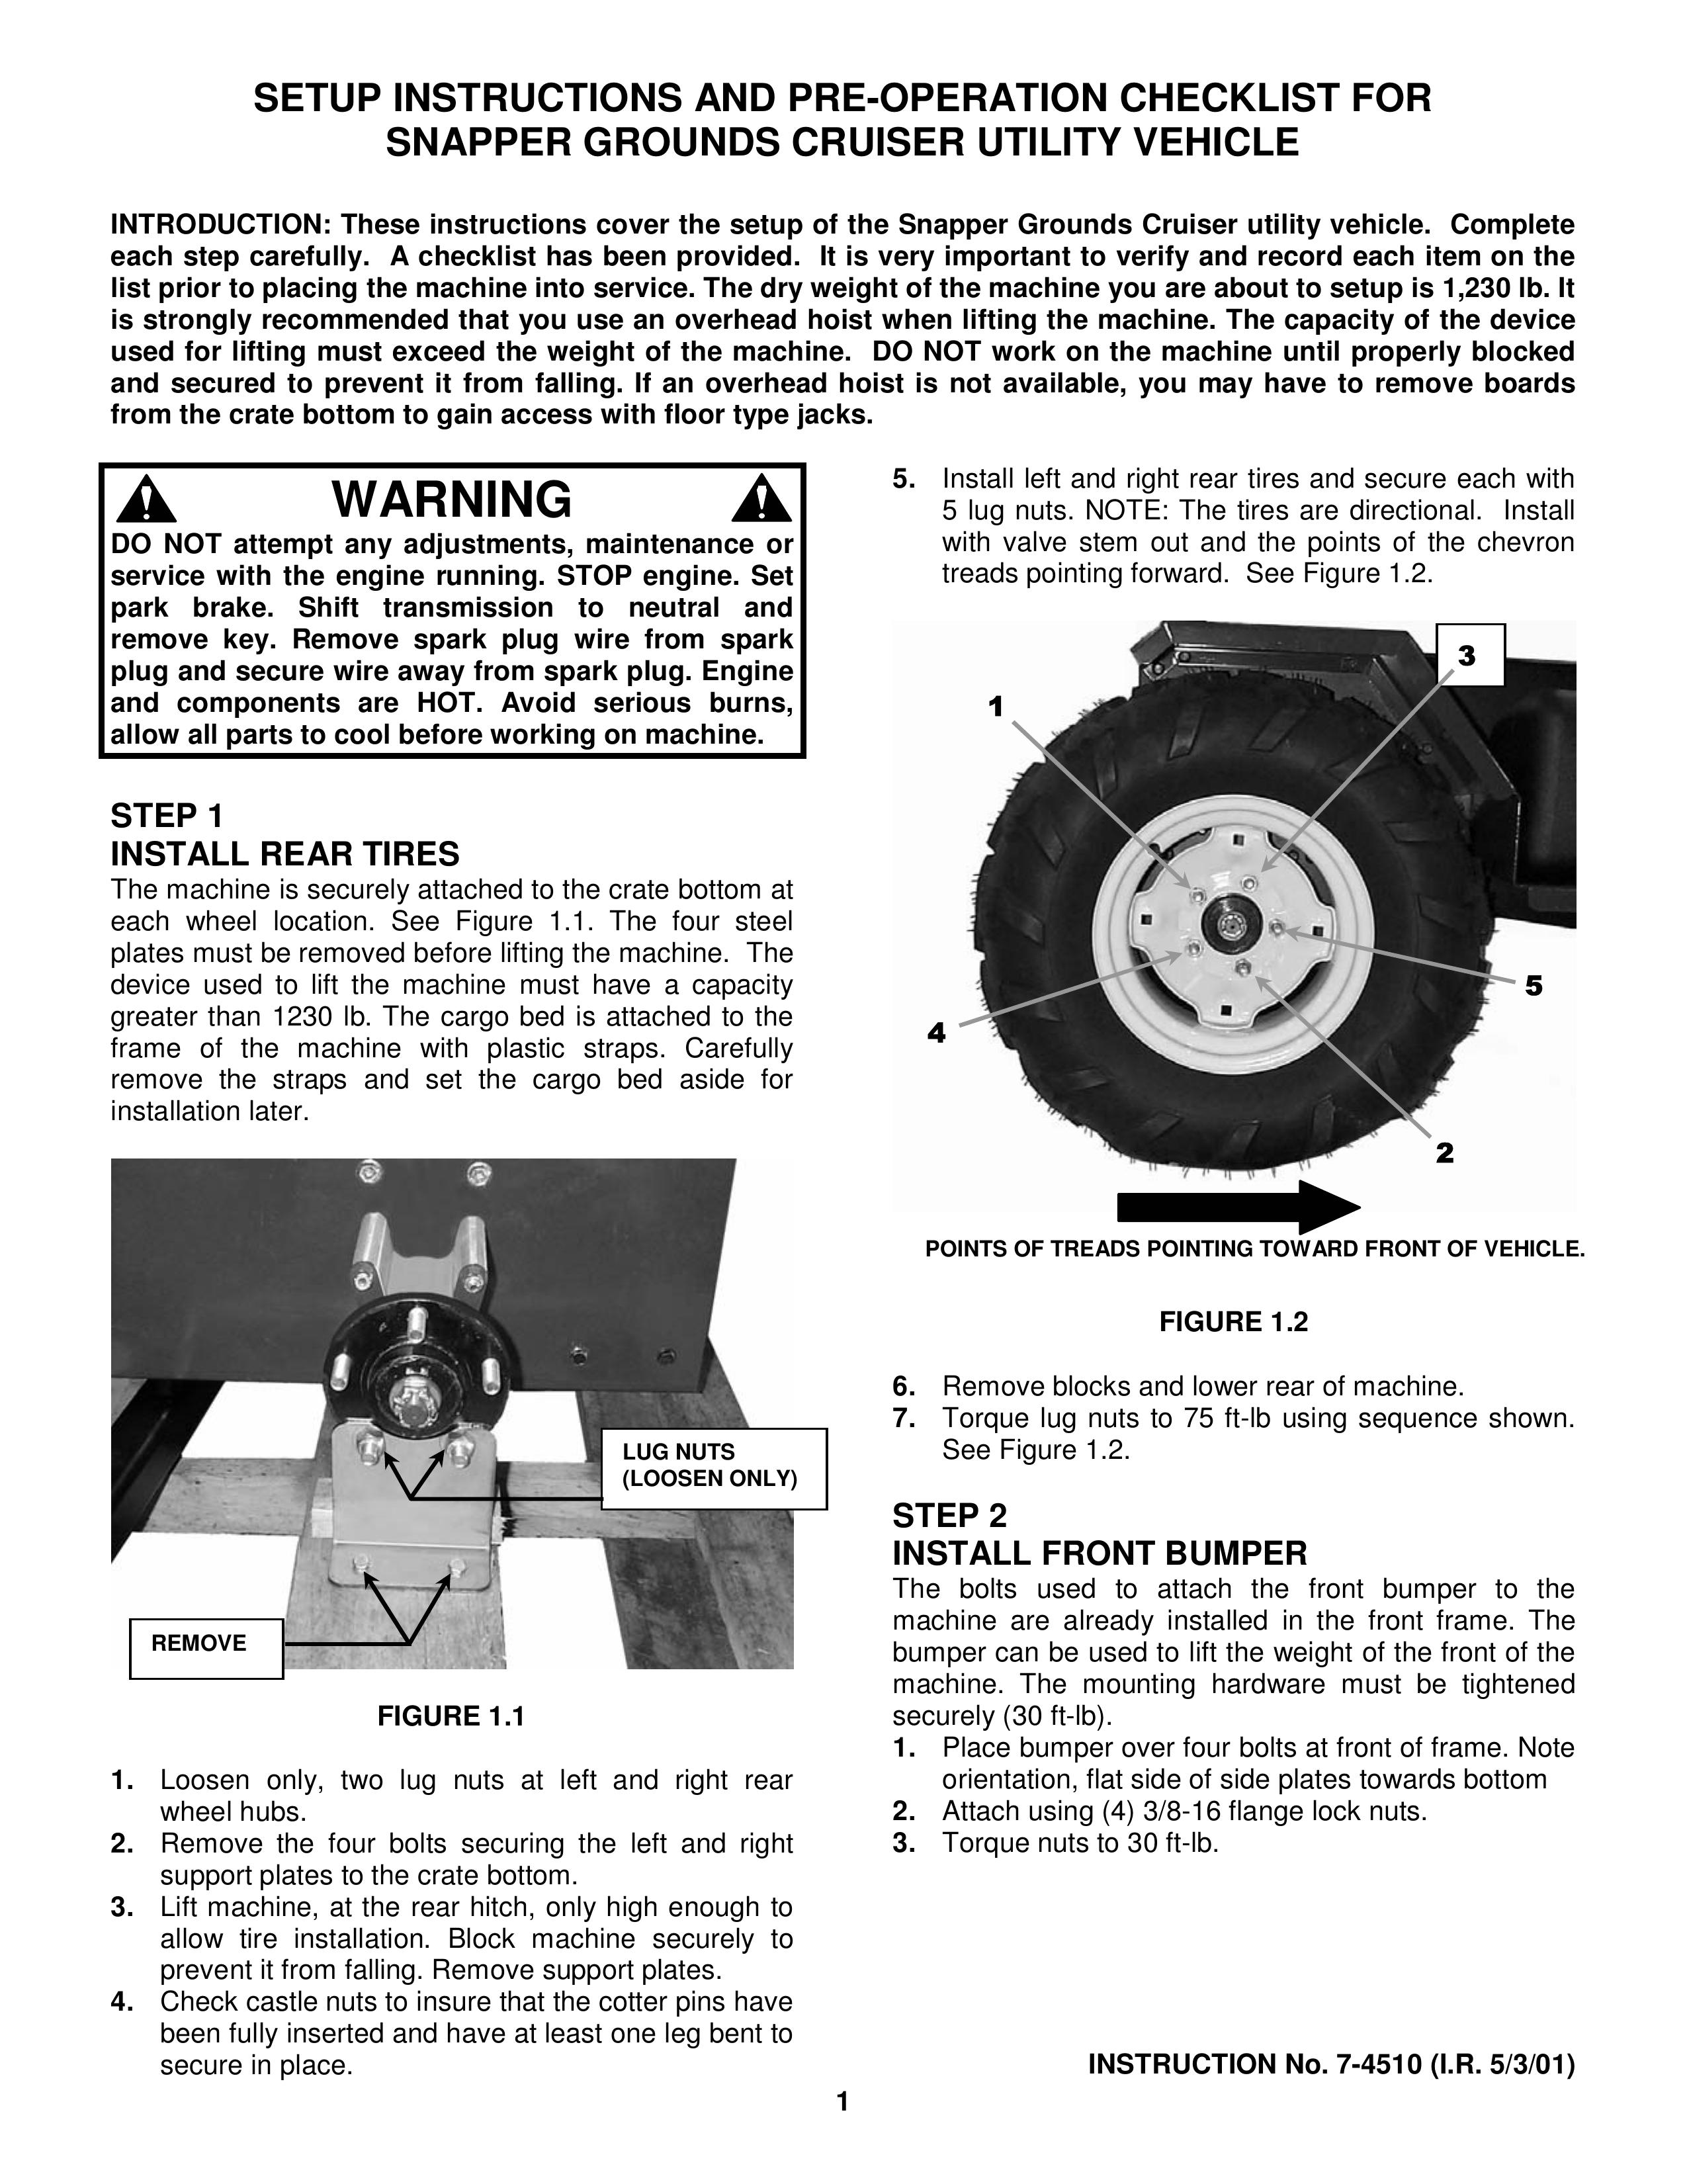 Snapper 7-4510 Utility Vehicle User Manual